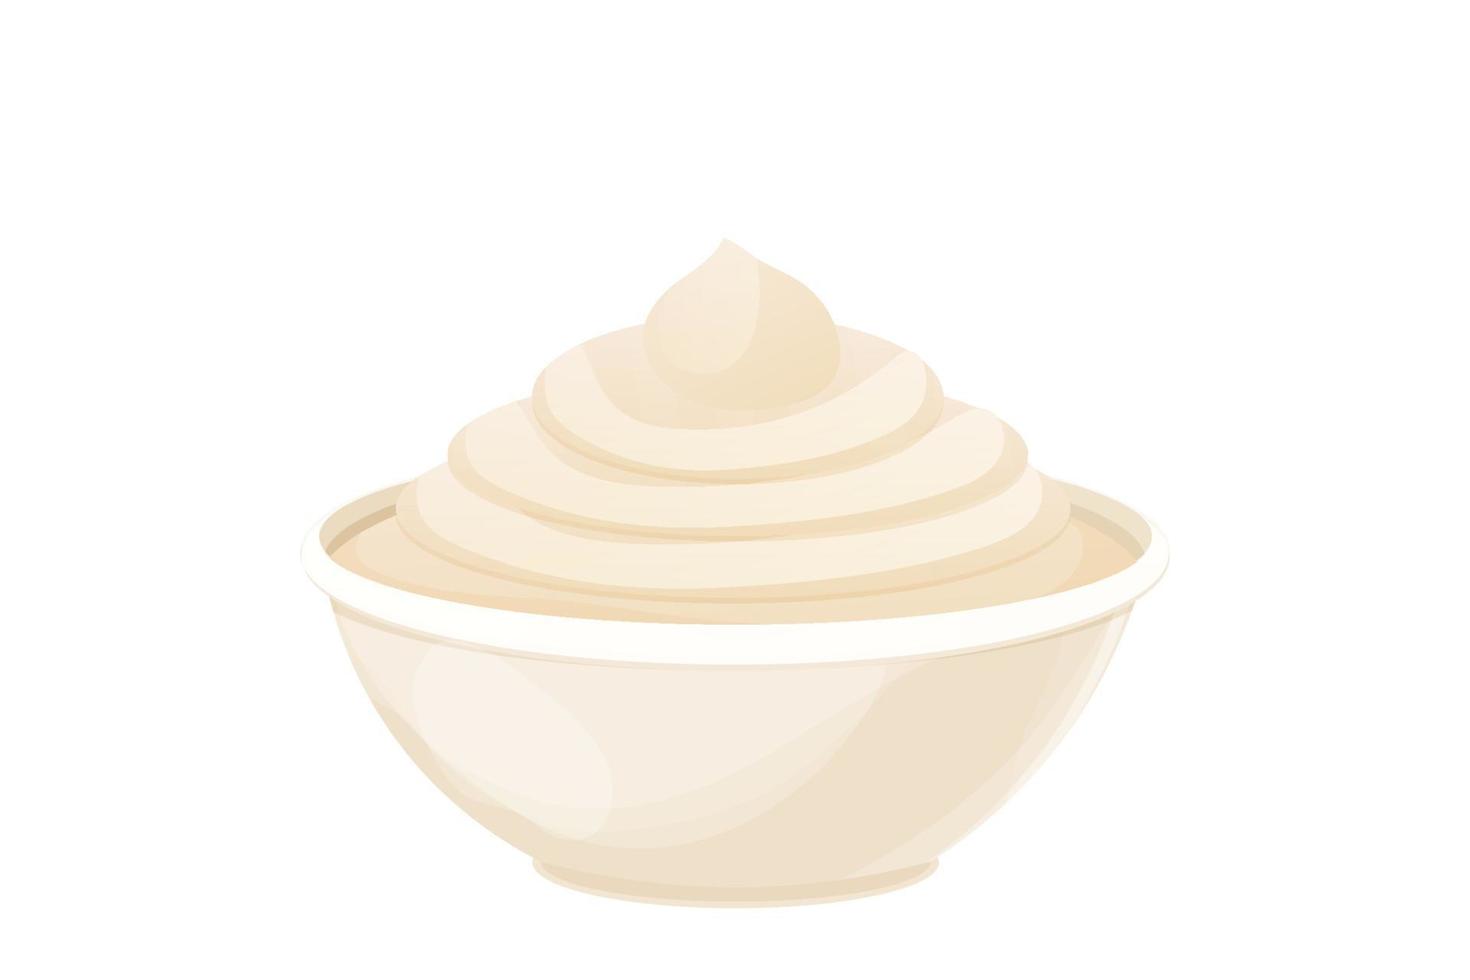 Mayonnaise sauce in dip bowl, cream, mousse in cartoon style isolated on white background. Vector illustration